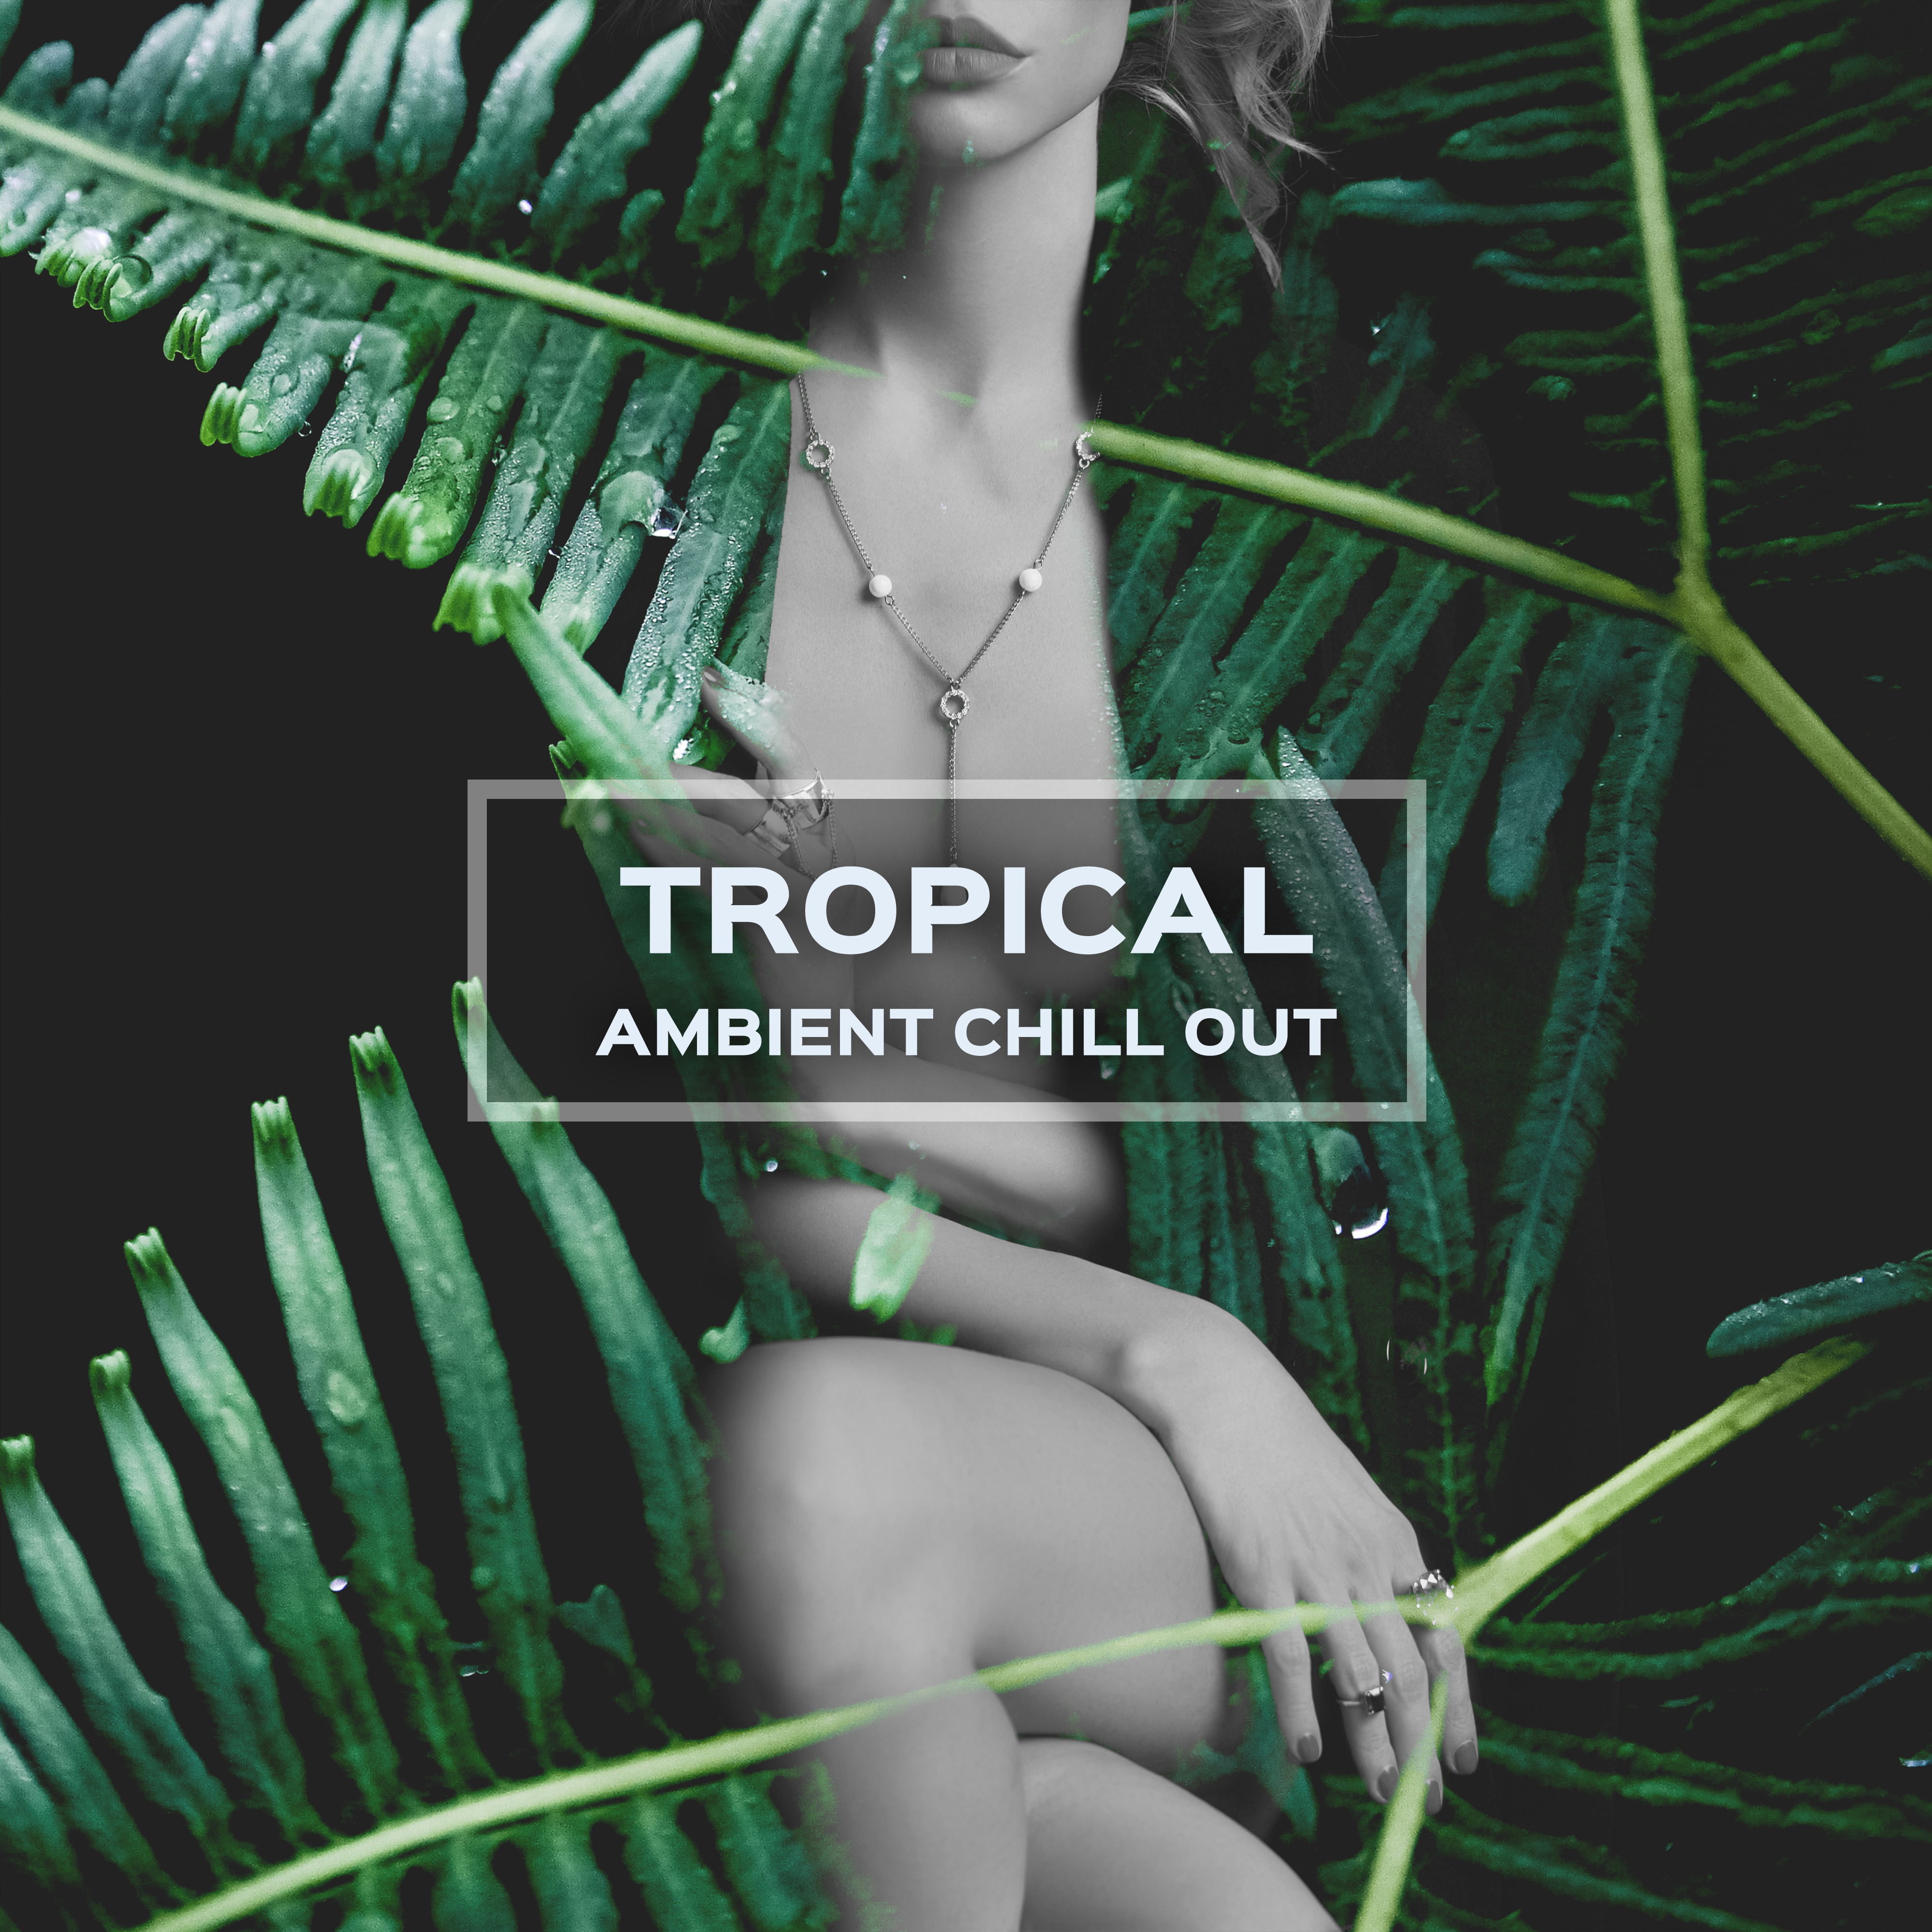 Tropical Ambient Chill Out